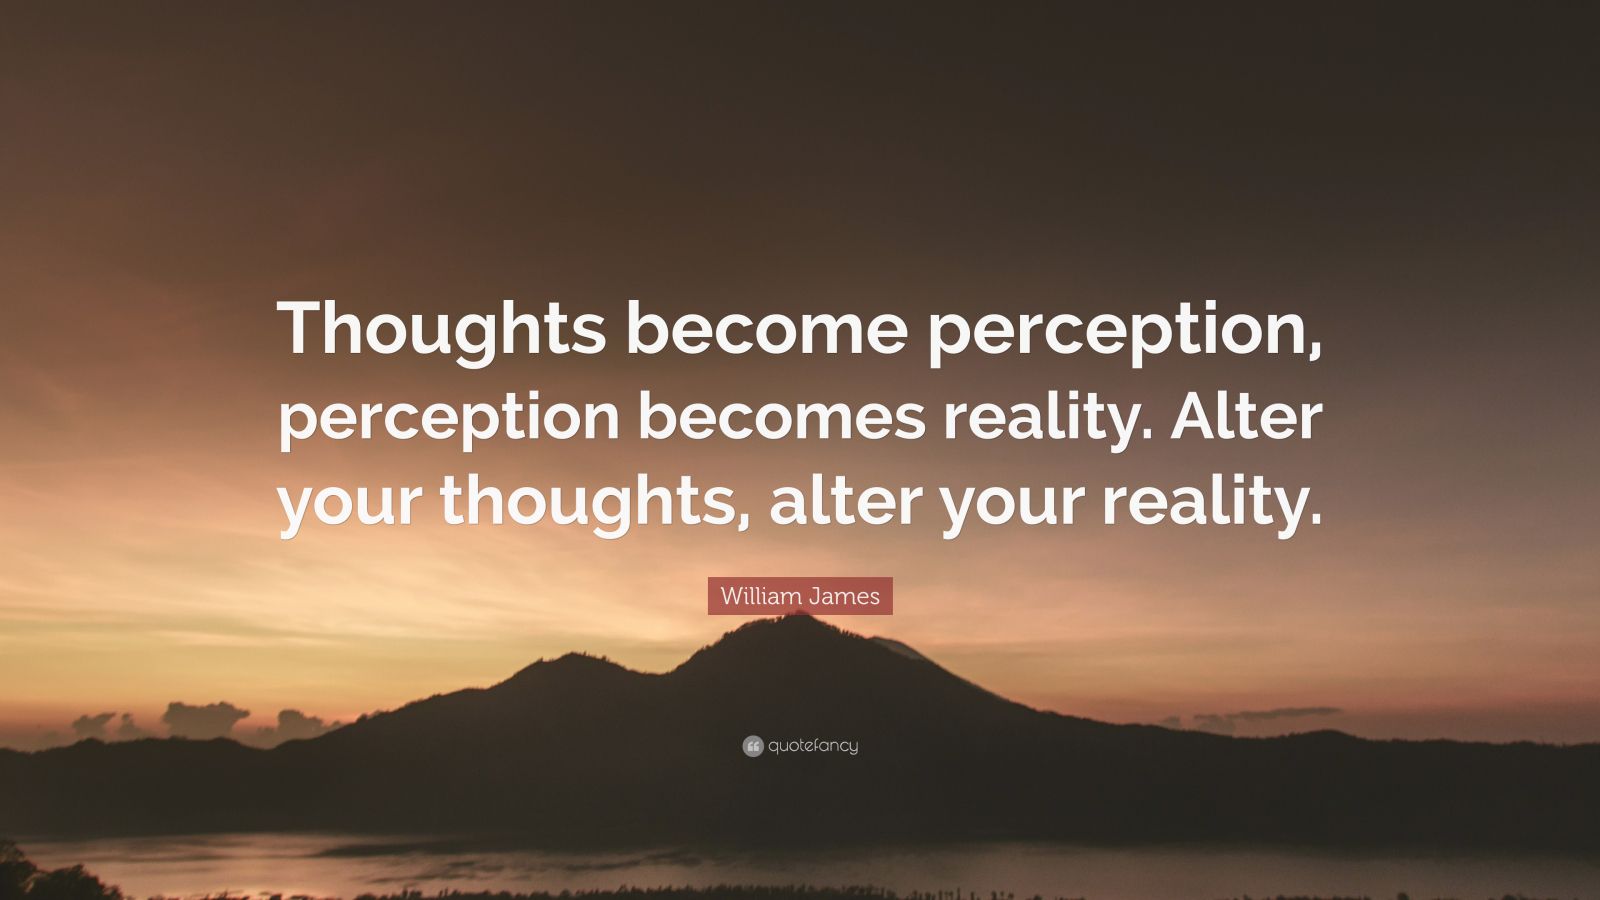 William James Quote: “Thoughts become perception, perception becomes ...